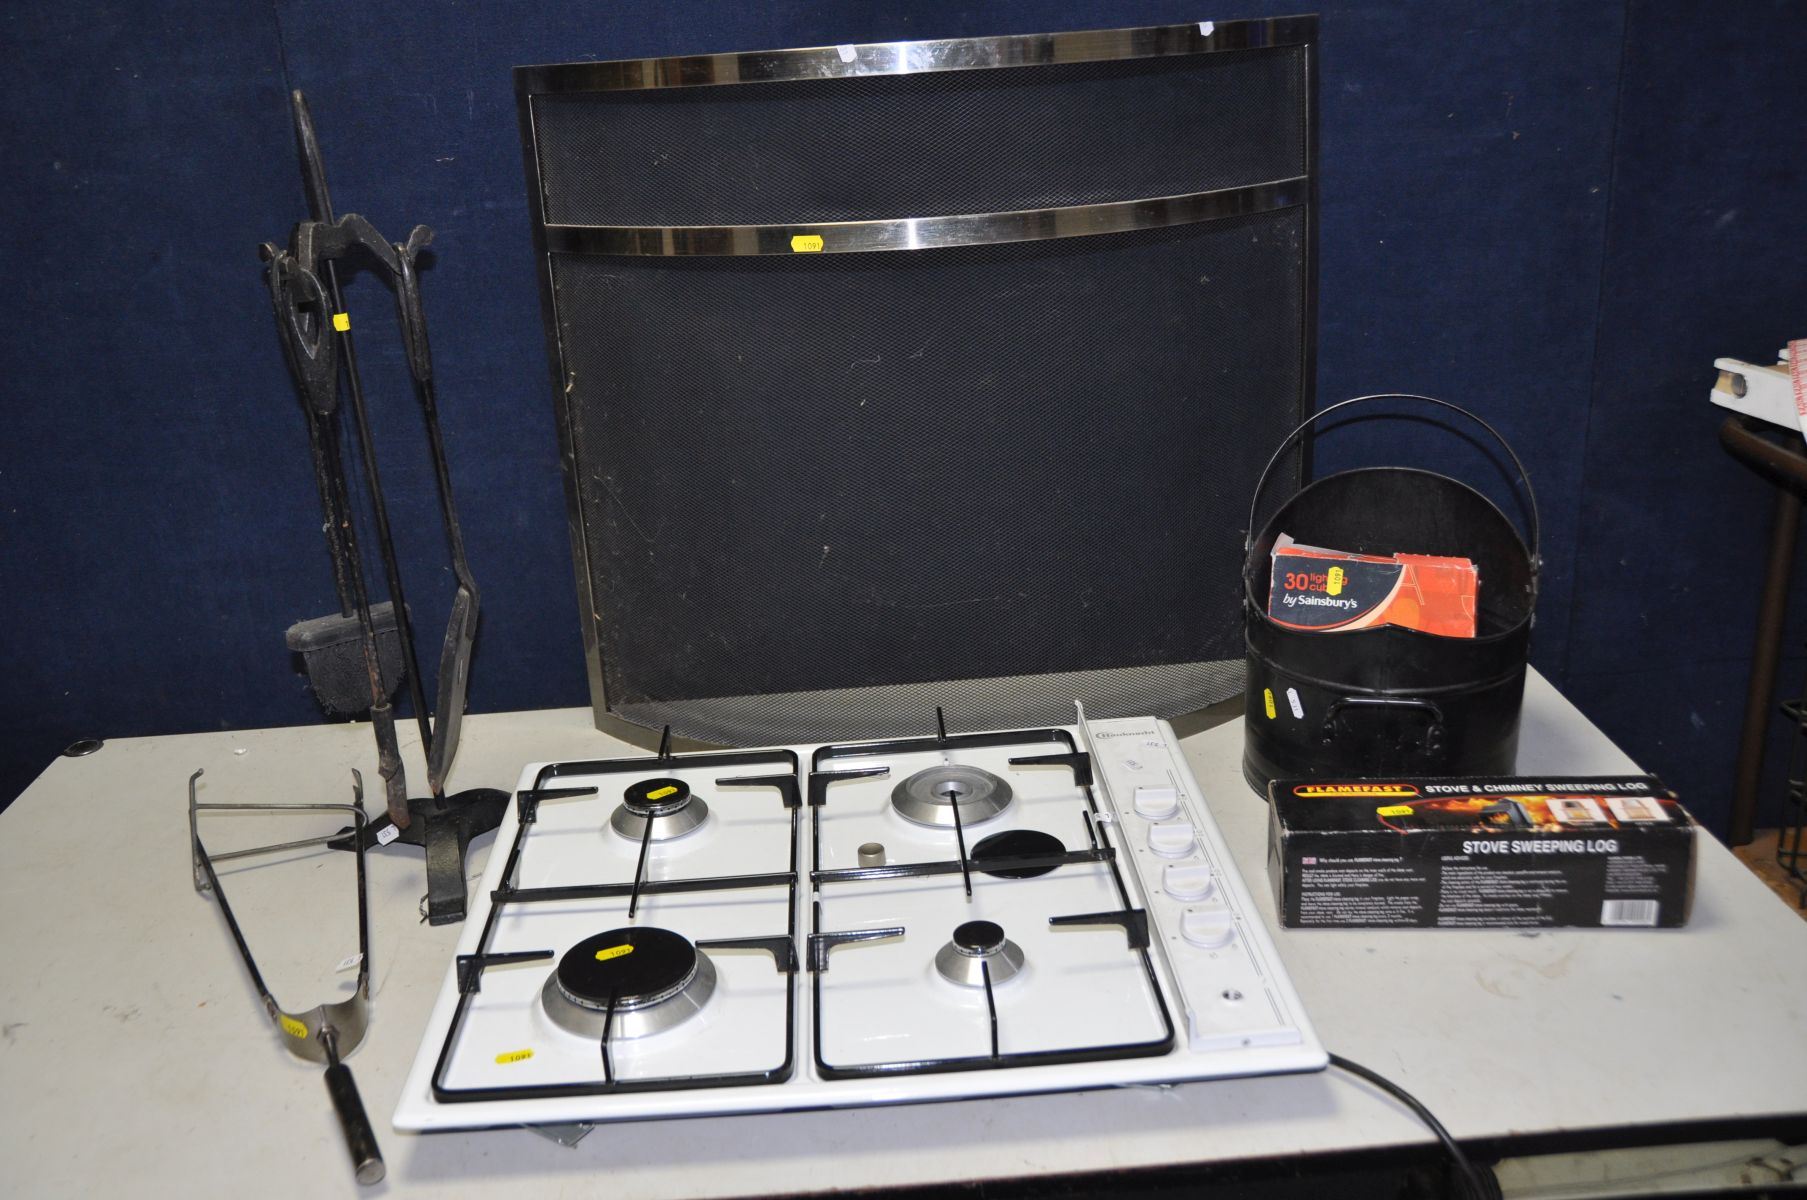 A BAUKNECHT GAS HOB (missing one gas ring and ignition knob doesn't fit) a curved Fire Guard, a